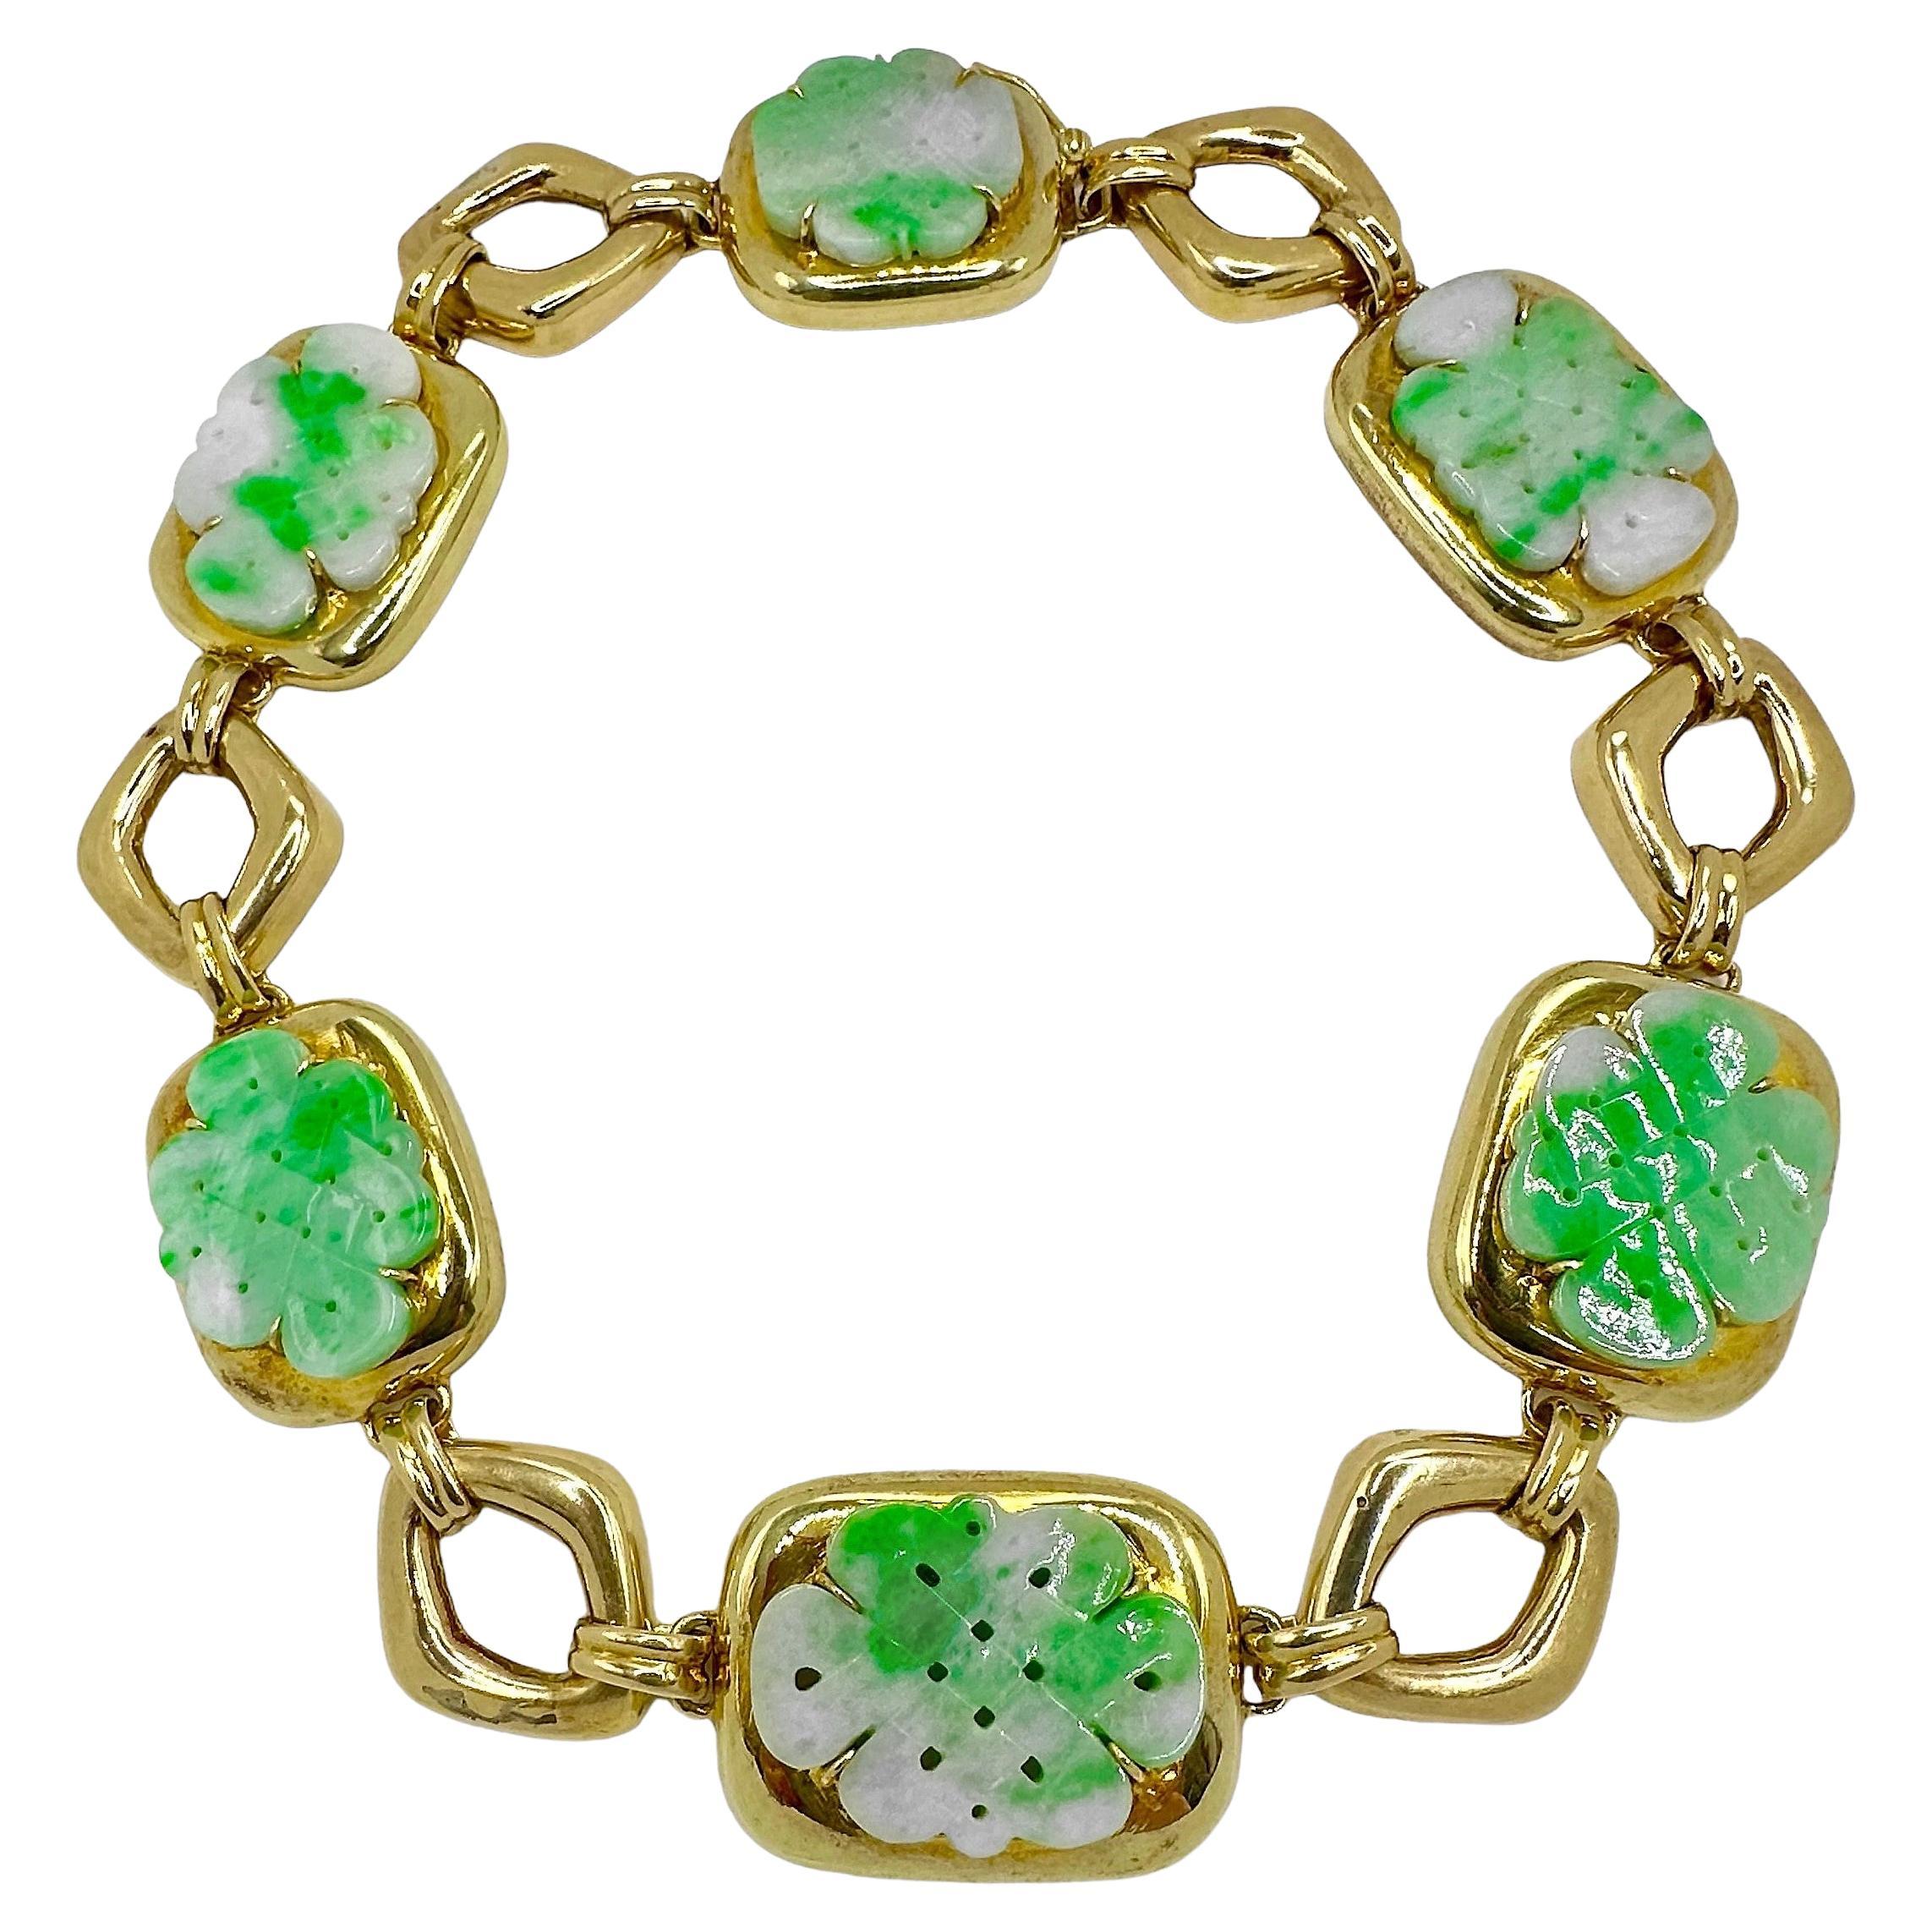 Massive and Distinctive 18K Gold and Jadeite Jade Choker Necklace by Trio For Sale